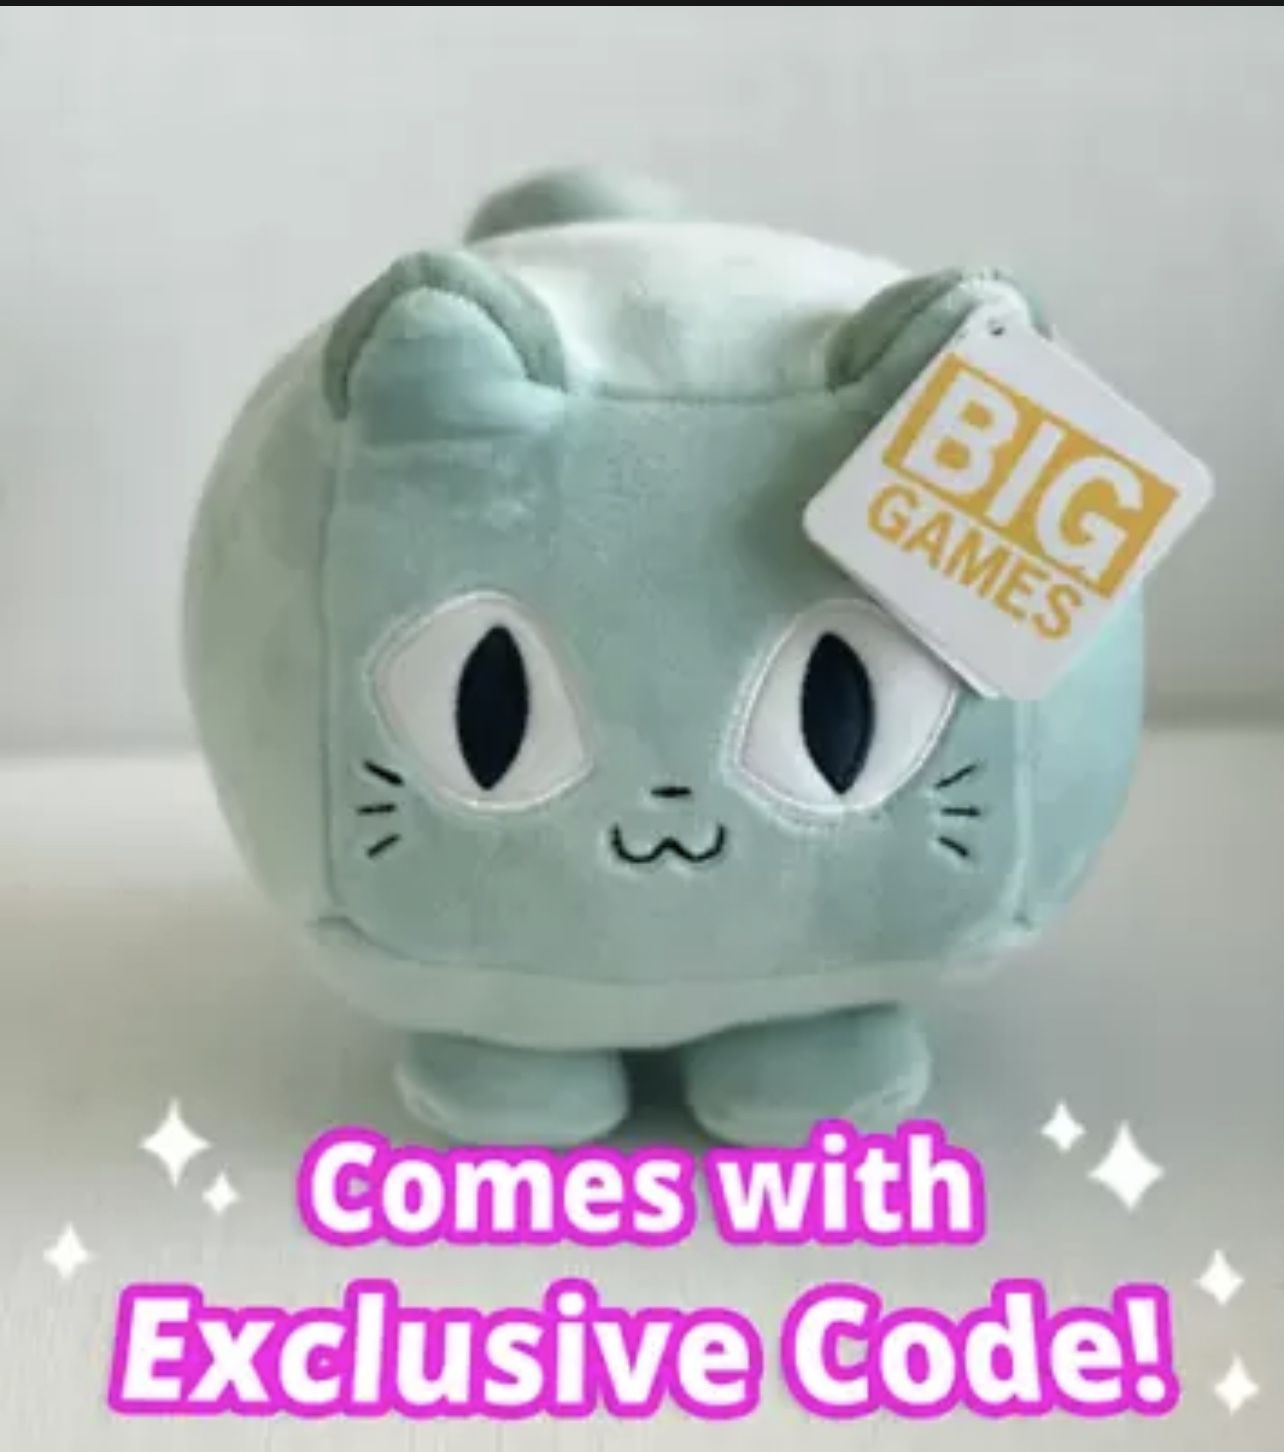 Big Games Pet Simulator X Cat Plush - Includes Redeemable Code - IN HAND